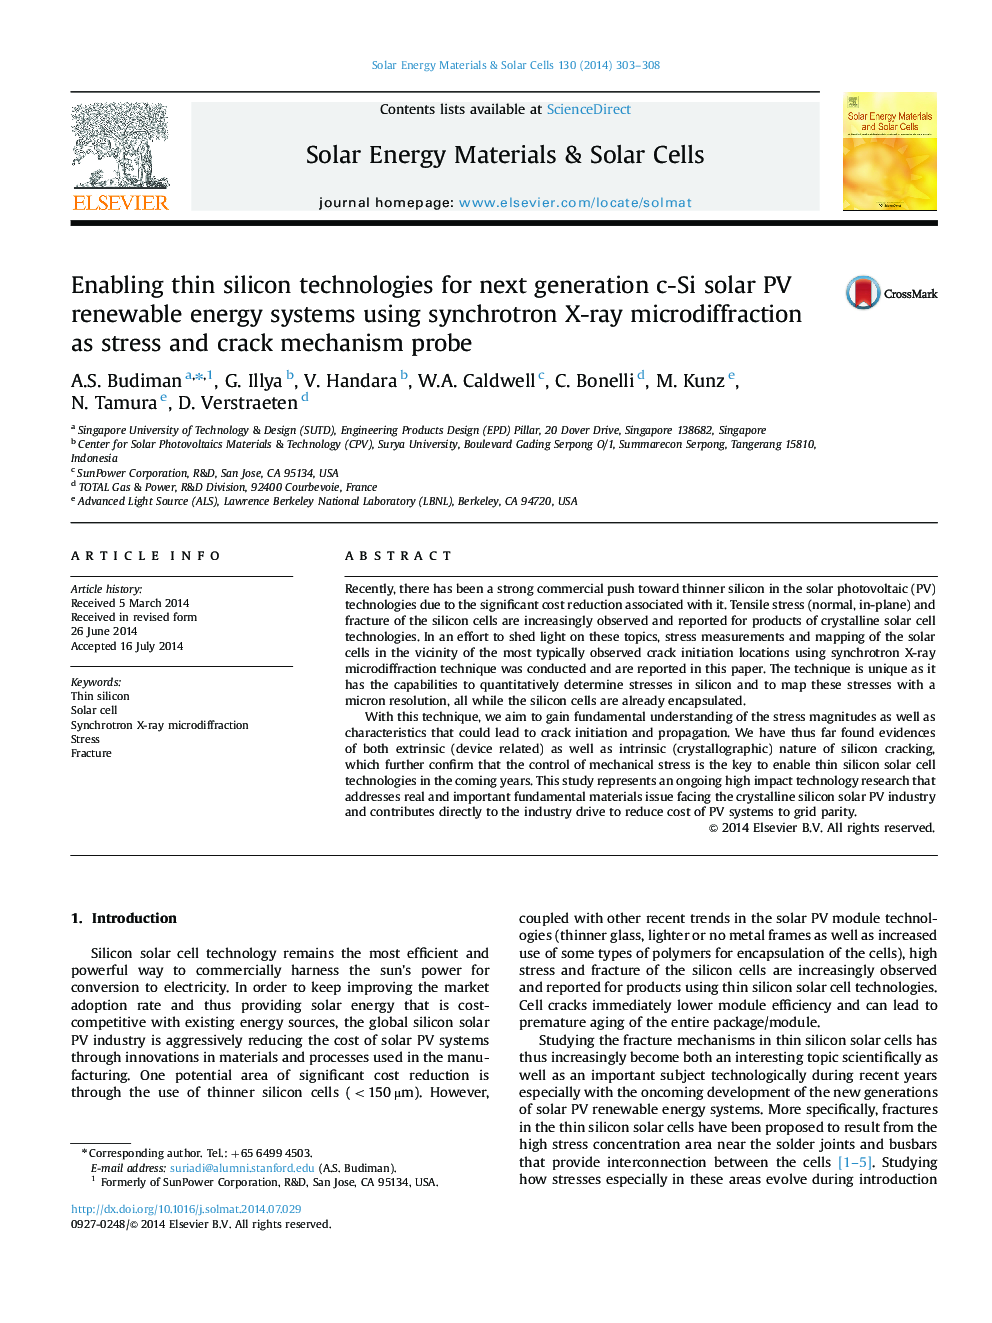 Enabling thin silicon technologies for next generation c-Si solar PV renewable energy systems using synchrotron X-ray microdiffraction as stress and crack mechanism probe